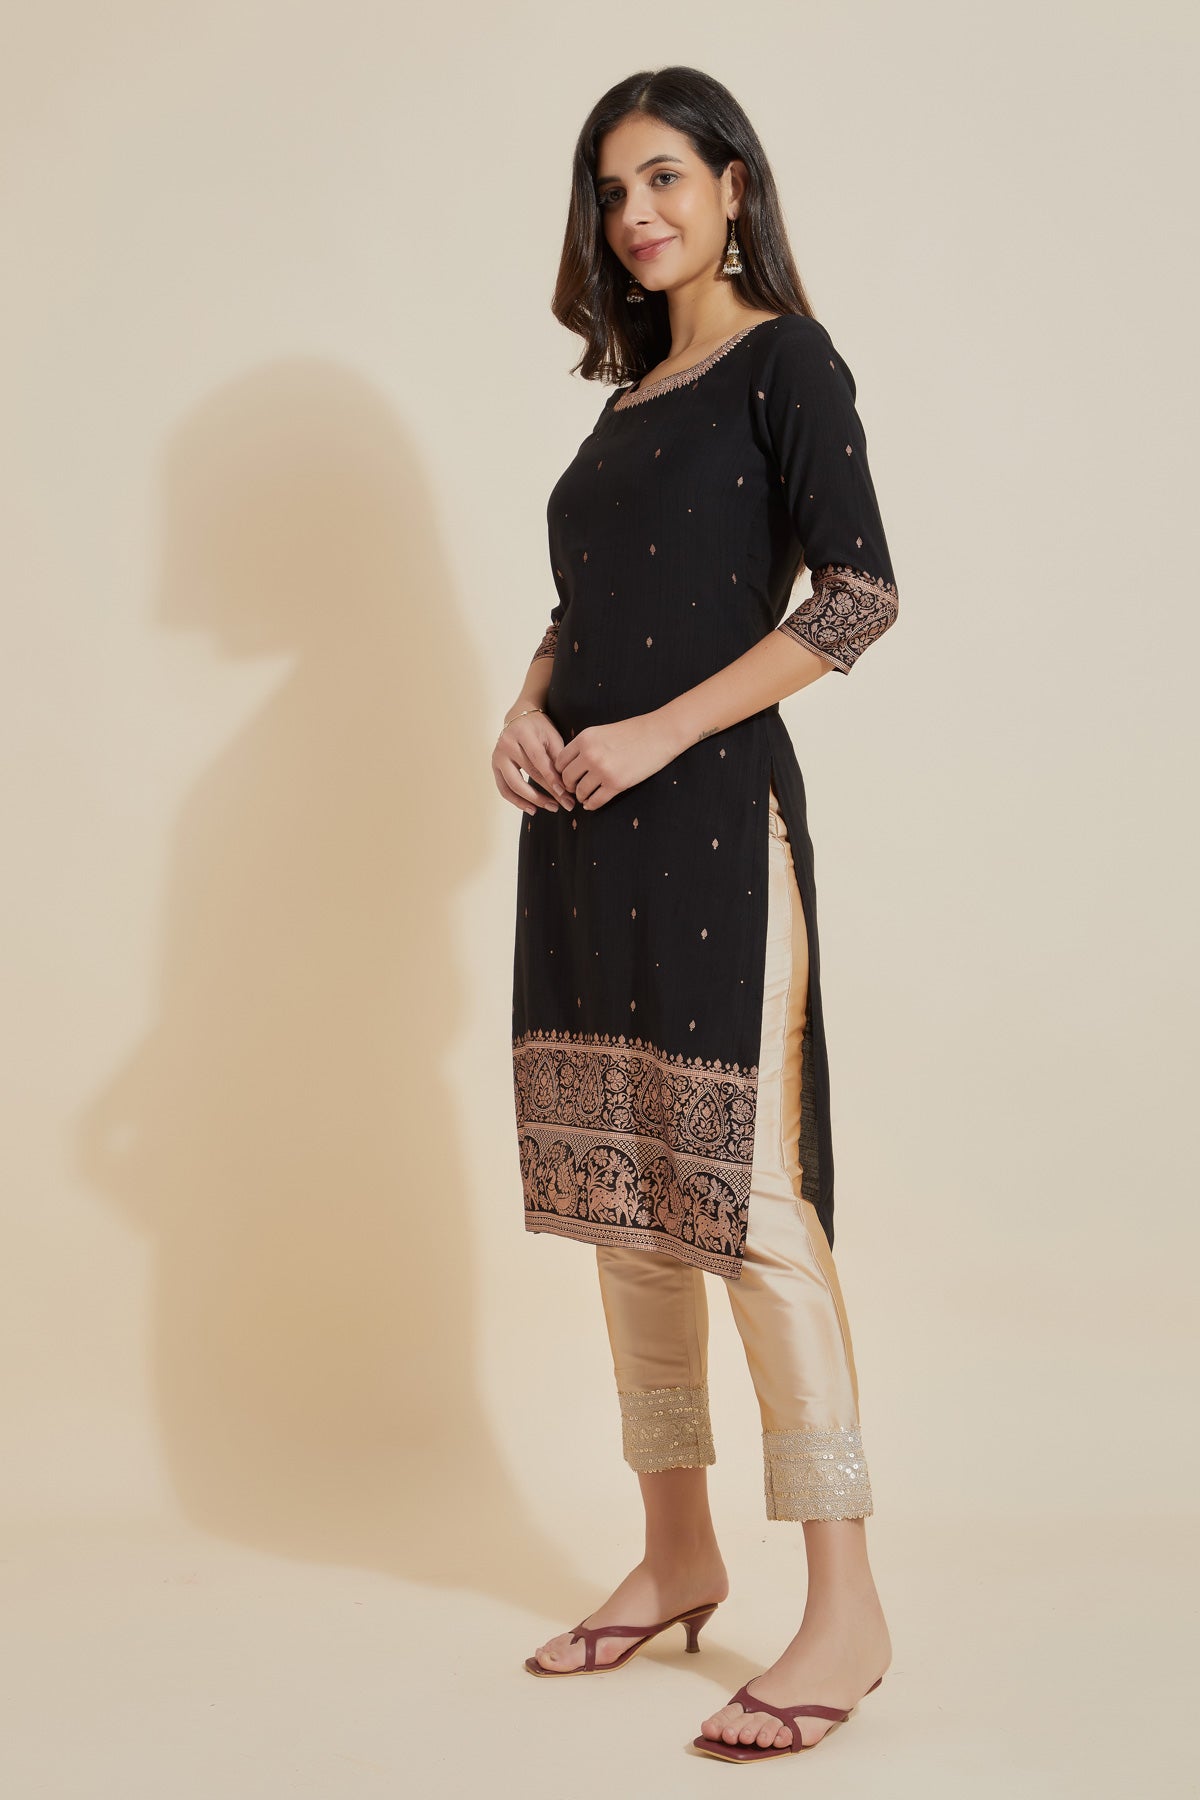 Jewel Inspired Embroidered Neckline With Contemporary Printed Border - Black